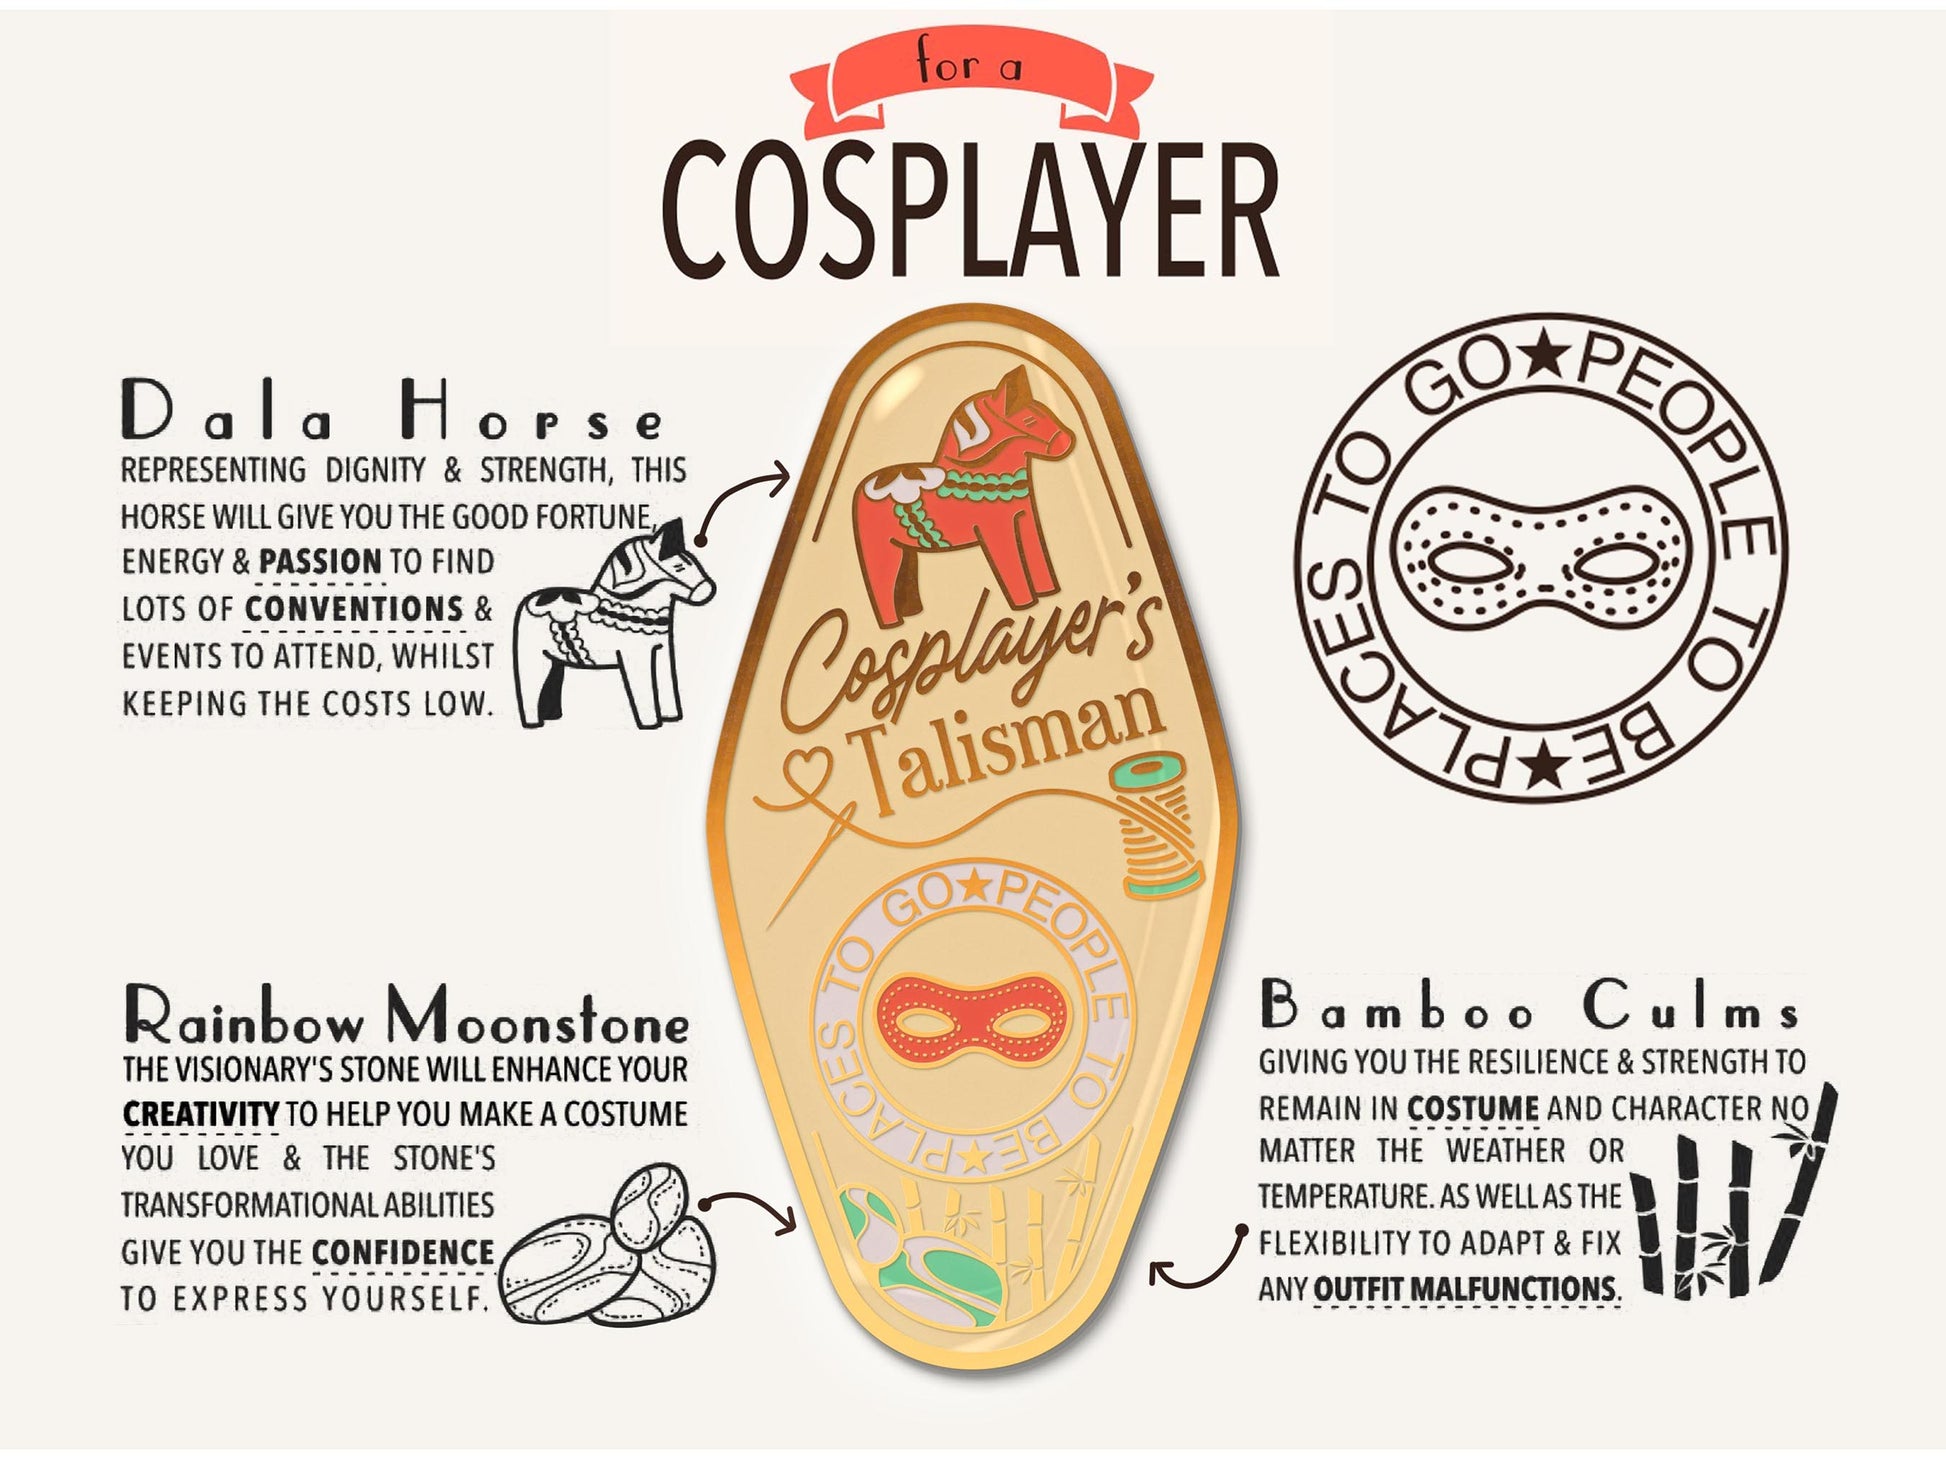 A illustrated diagram outline the symbolism of the different design elements of the for a Cosplayer Talisman pin. Information includes the meaning of the Dala Horse, Rainbow Moonstone and Bamboo Culms